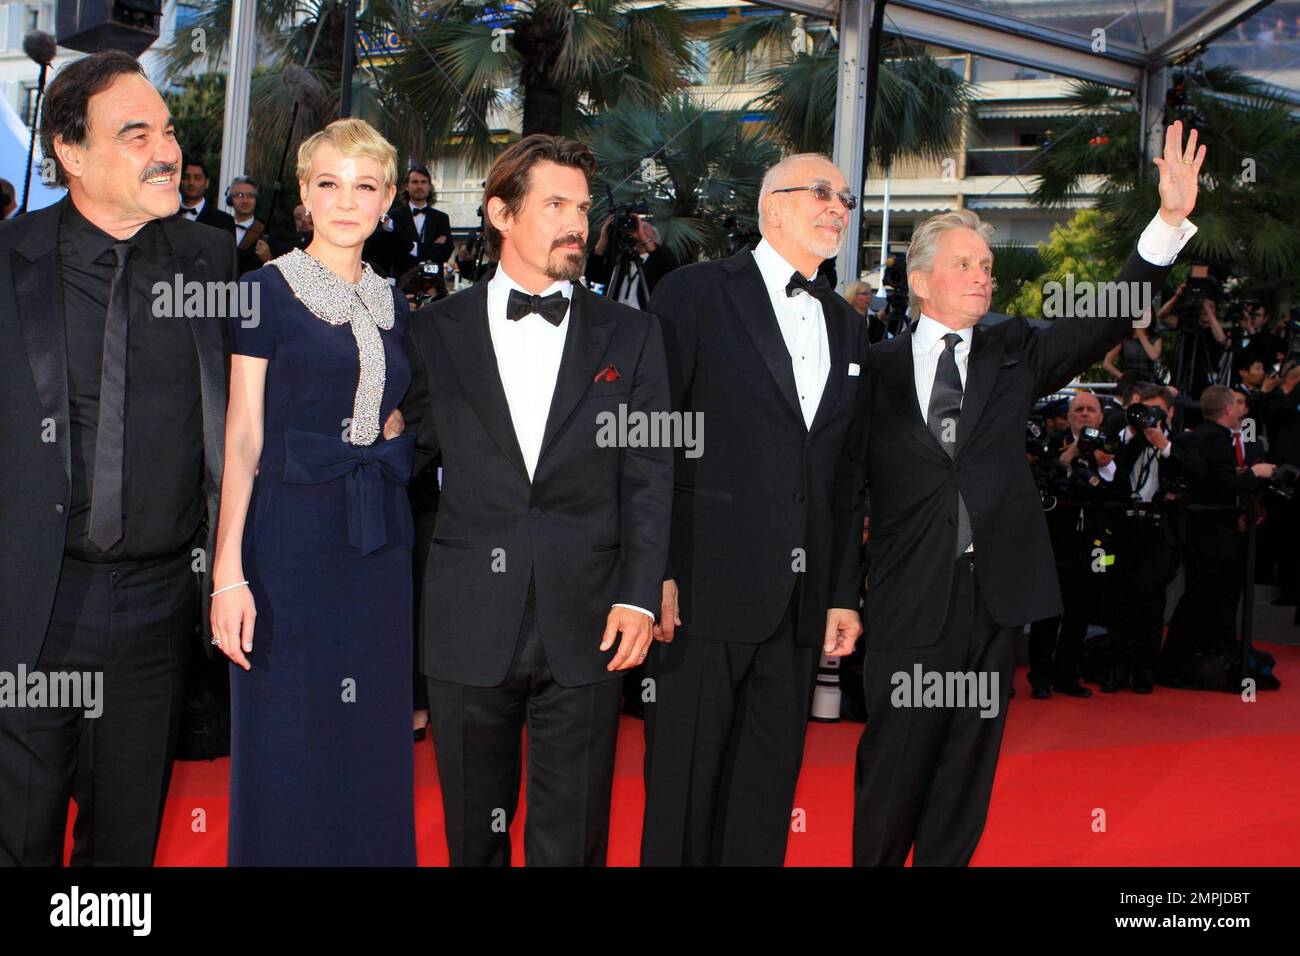 (L-R) Oliver Stone, Carey Mulligan, Josh Brolin, Frank Langella and Michael Douglas at the 63rd annual Cannes Film Festival premiere of 'Wall Street: Money Never Sleeps' in Cannes, France. 5/14/10.   . Stock Photo